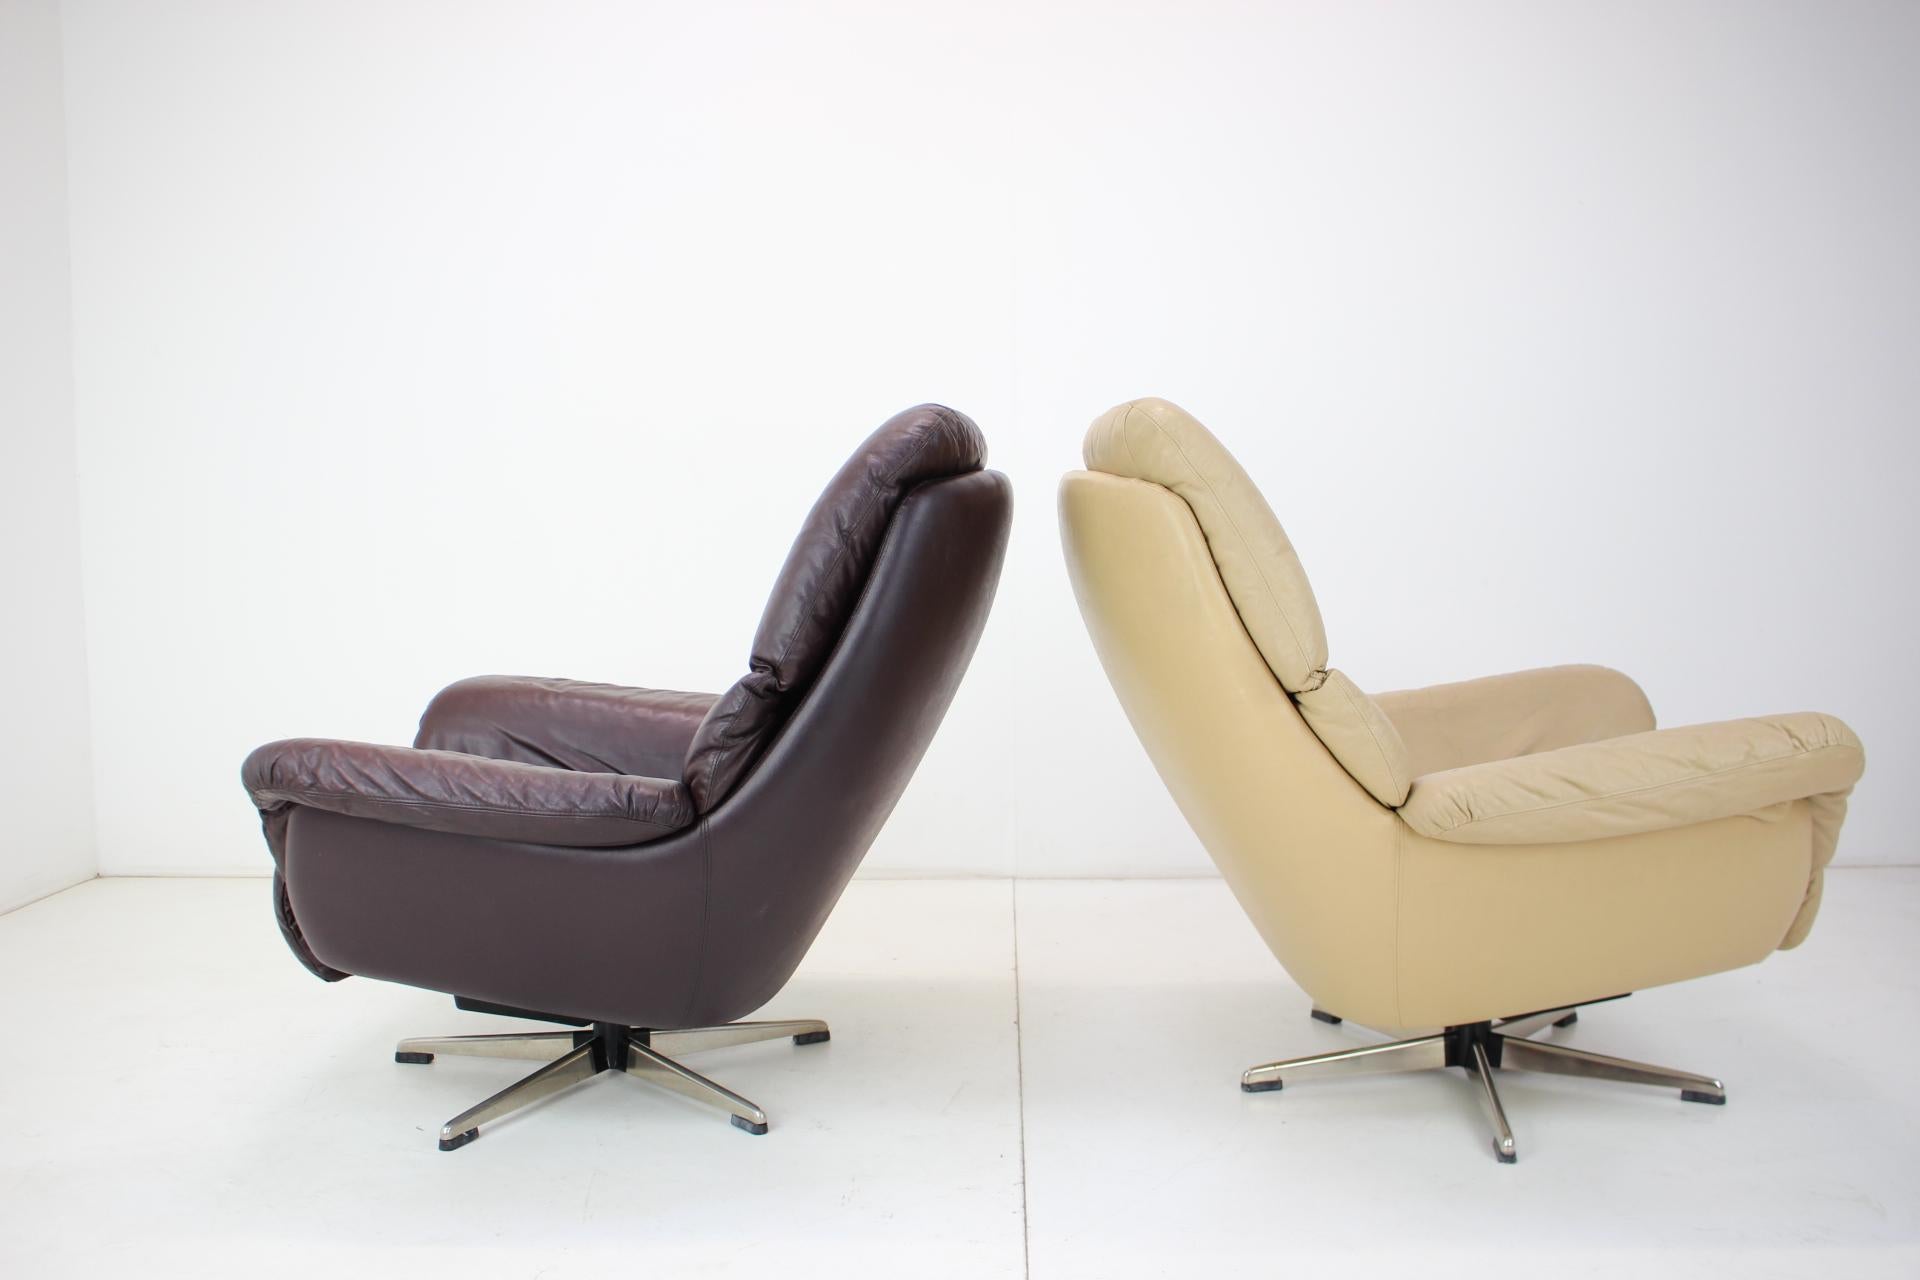 Finnish Set of Two Scandinavian Adjustable Leather Armchairs by Peem, 1970s, Finland For Sale